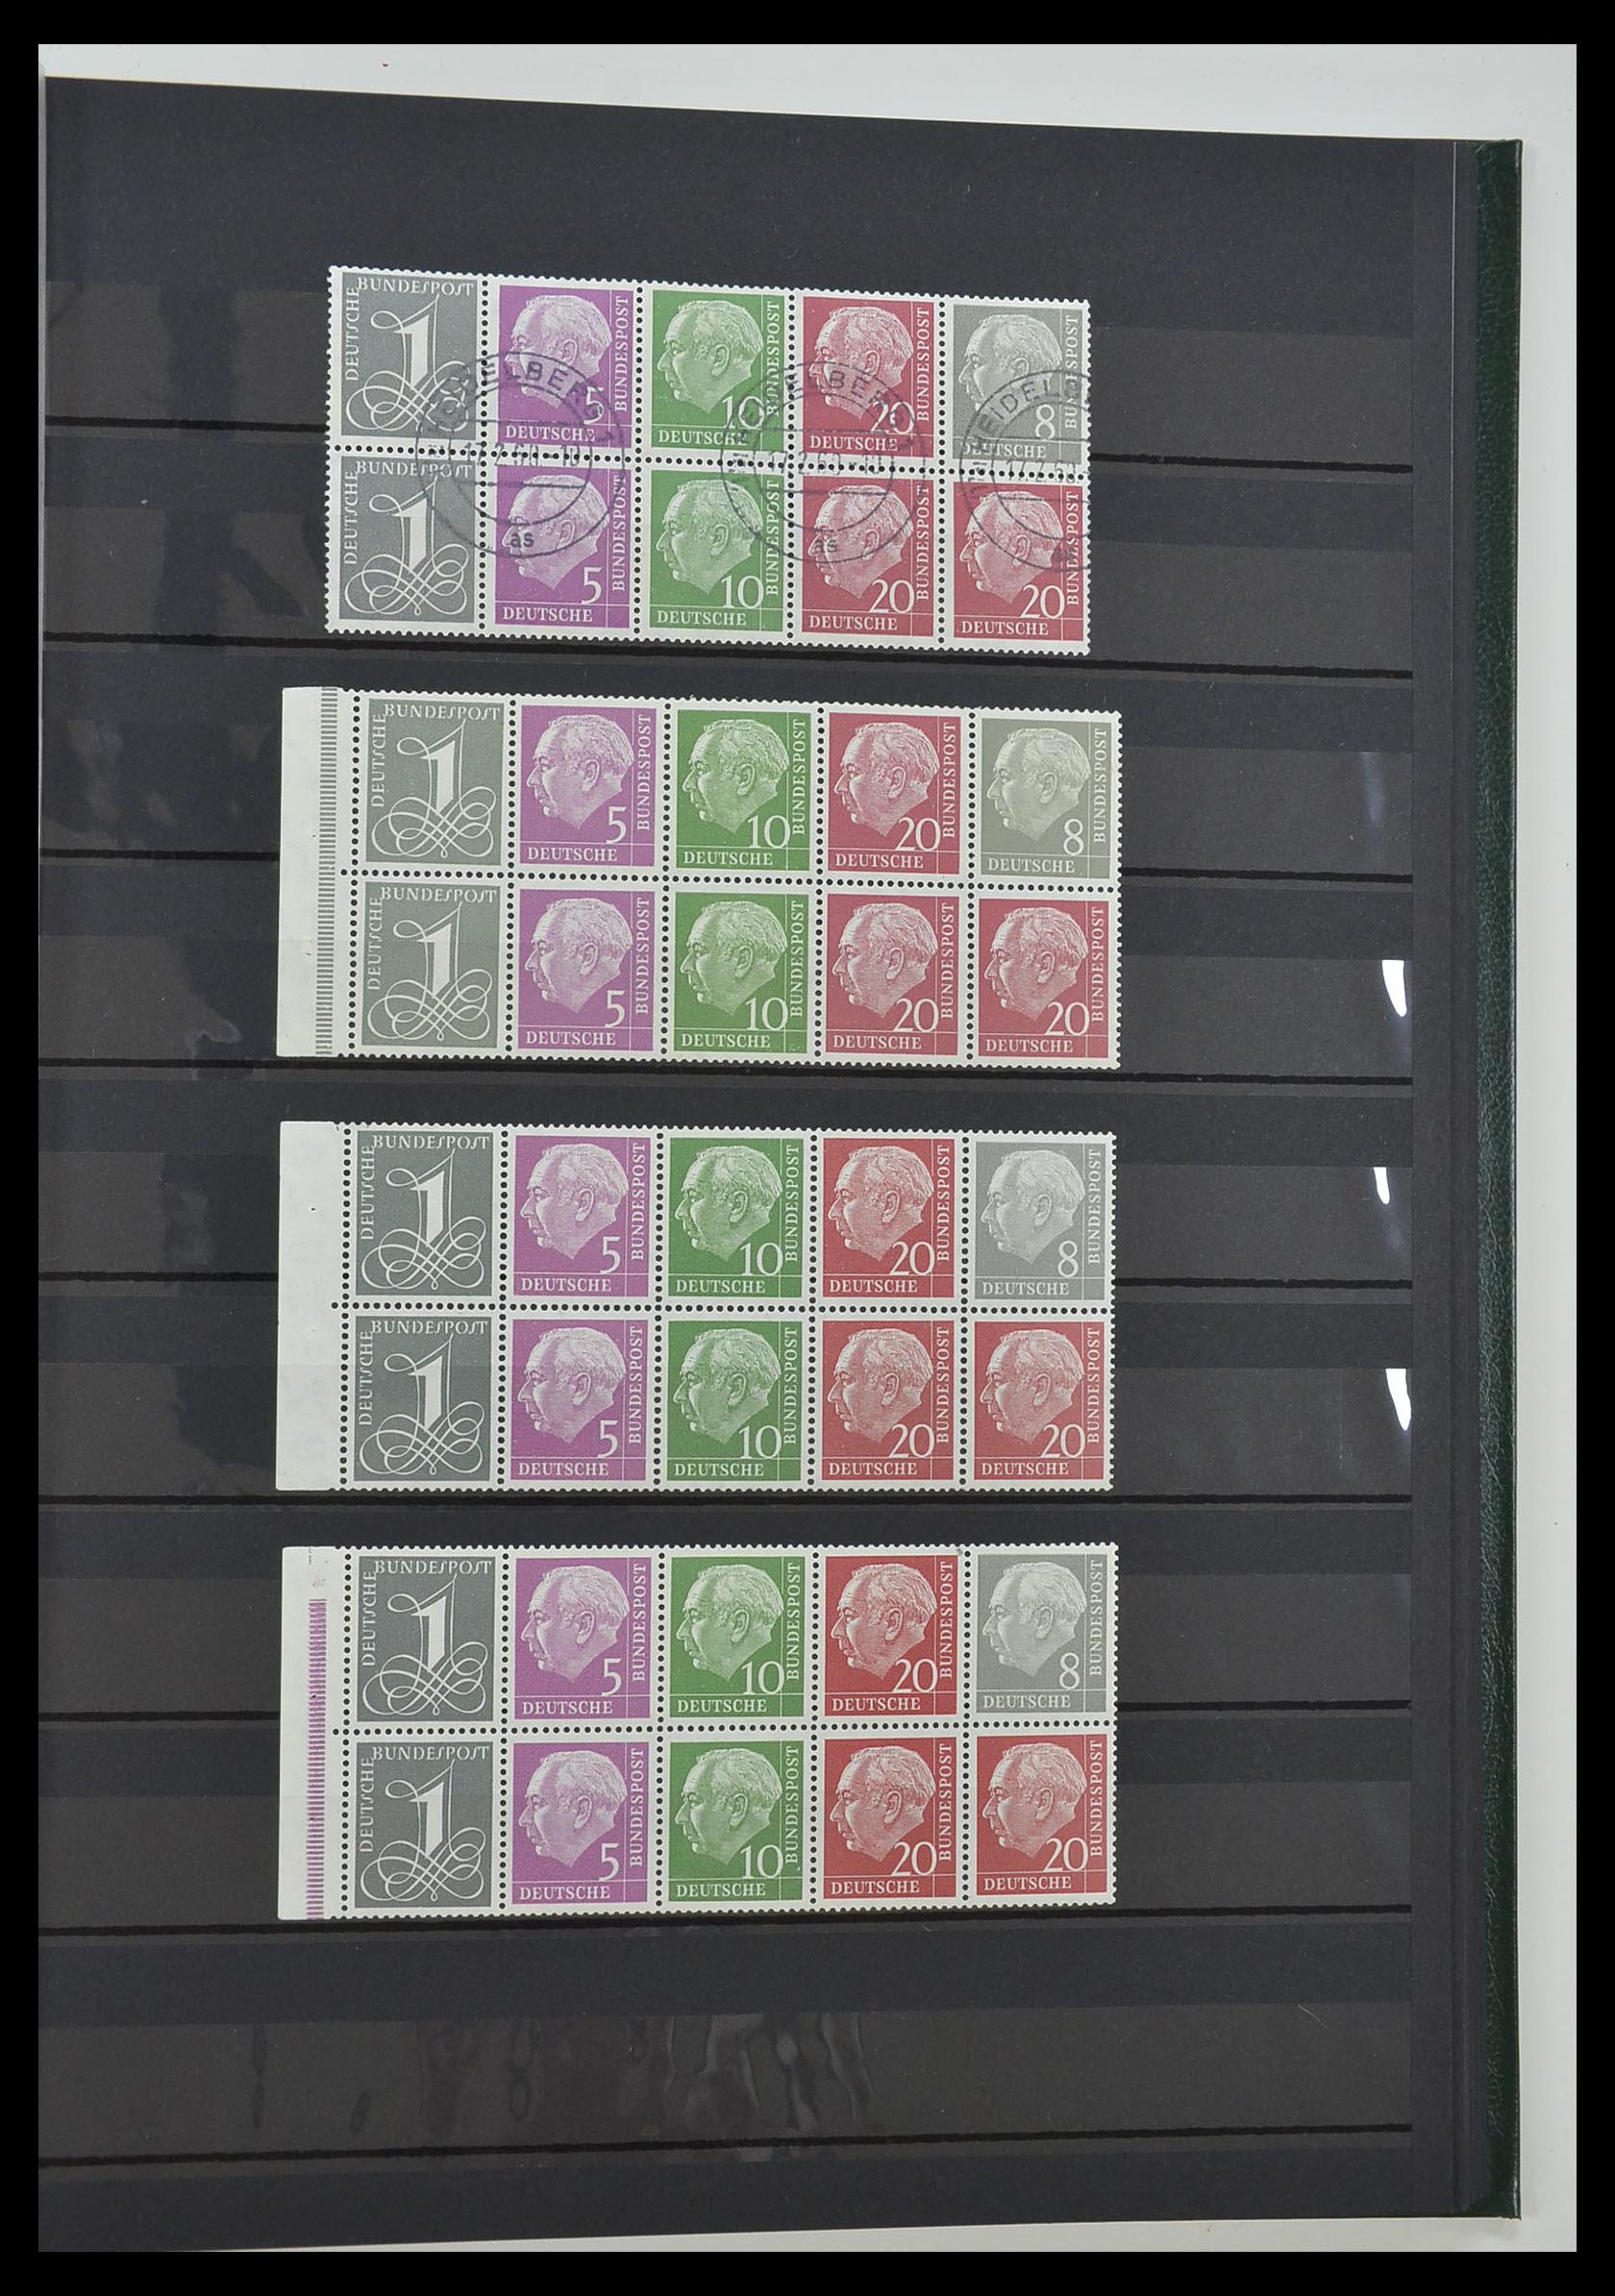 33275 037 - Stamp collection 33275 Bundespost combinations 1951-1960.